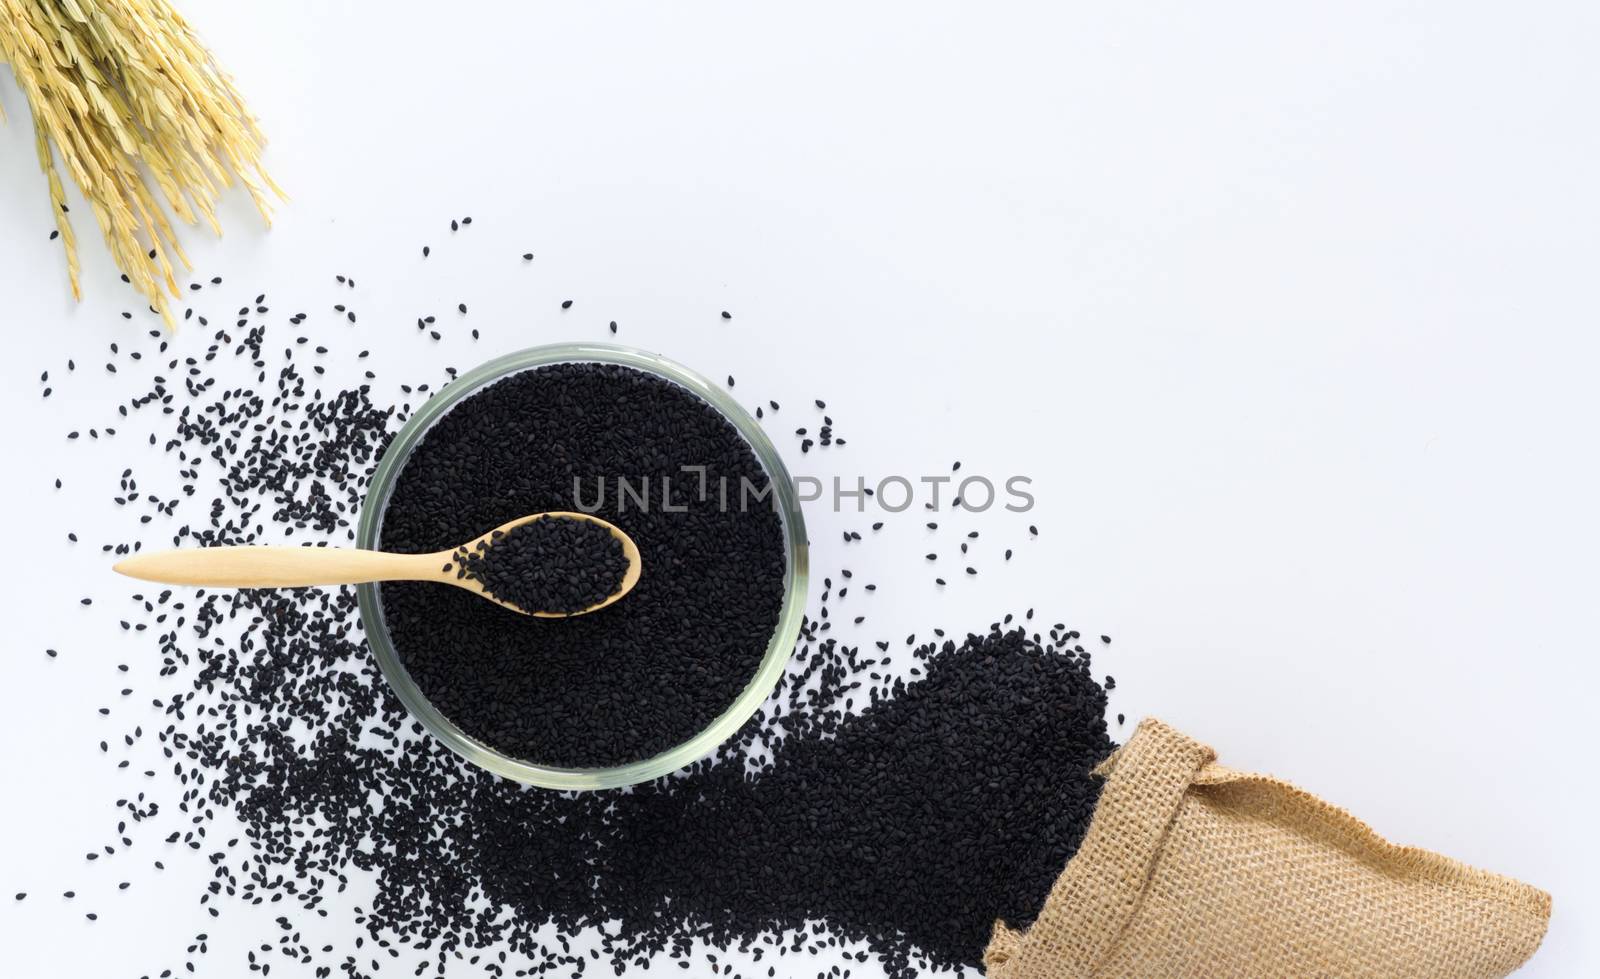 Black sesame in a cup on a white background with wooden spoon, sacks and ears of rice are elements.